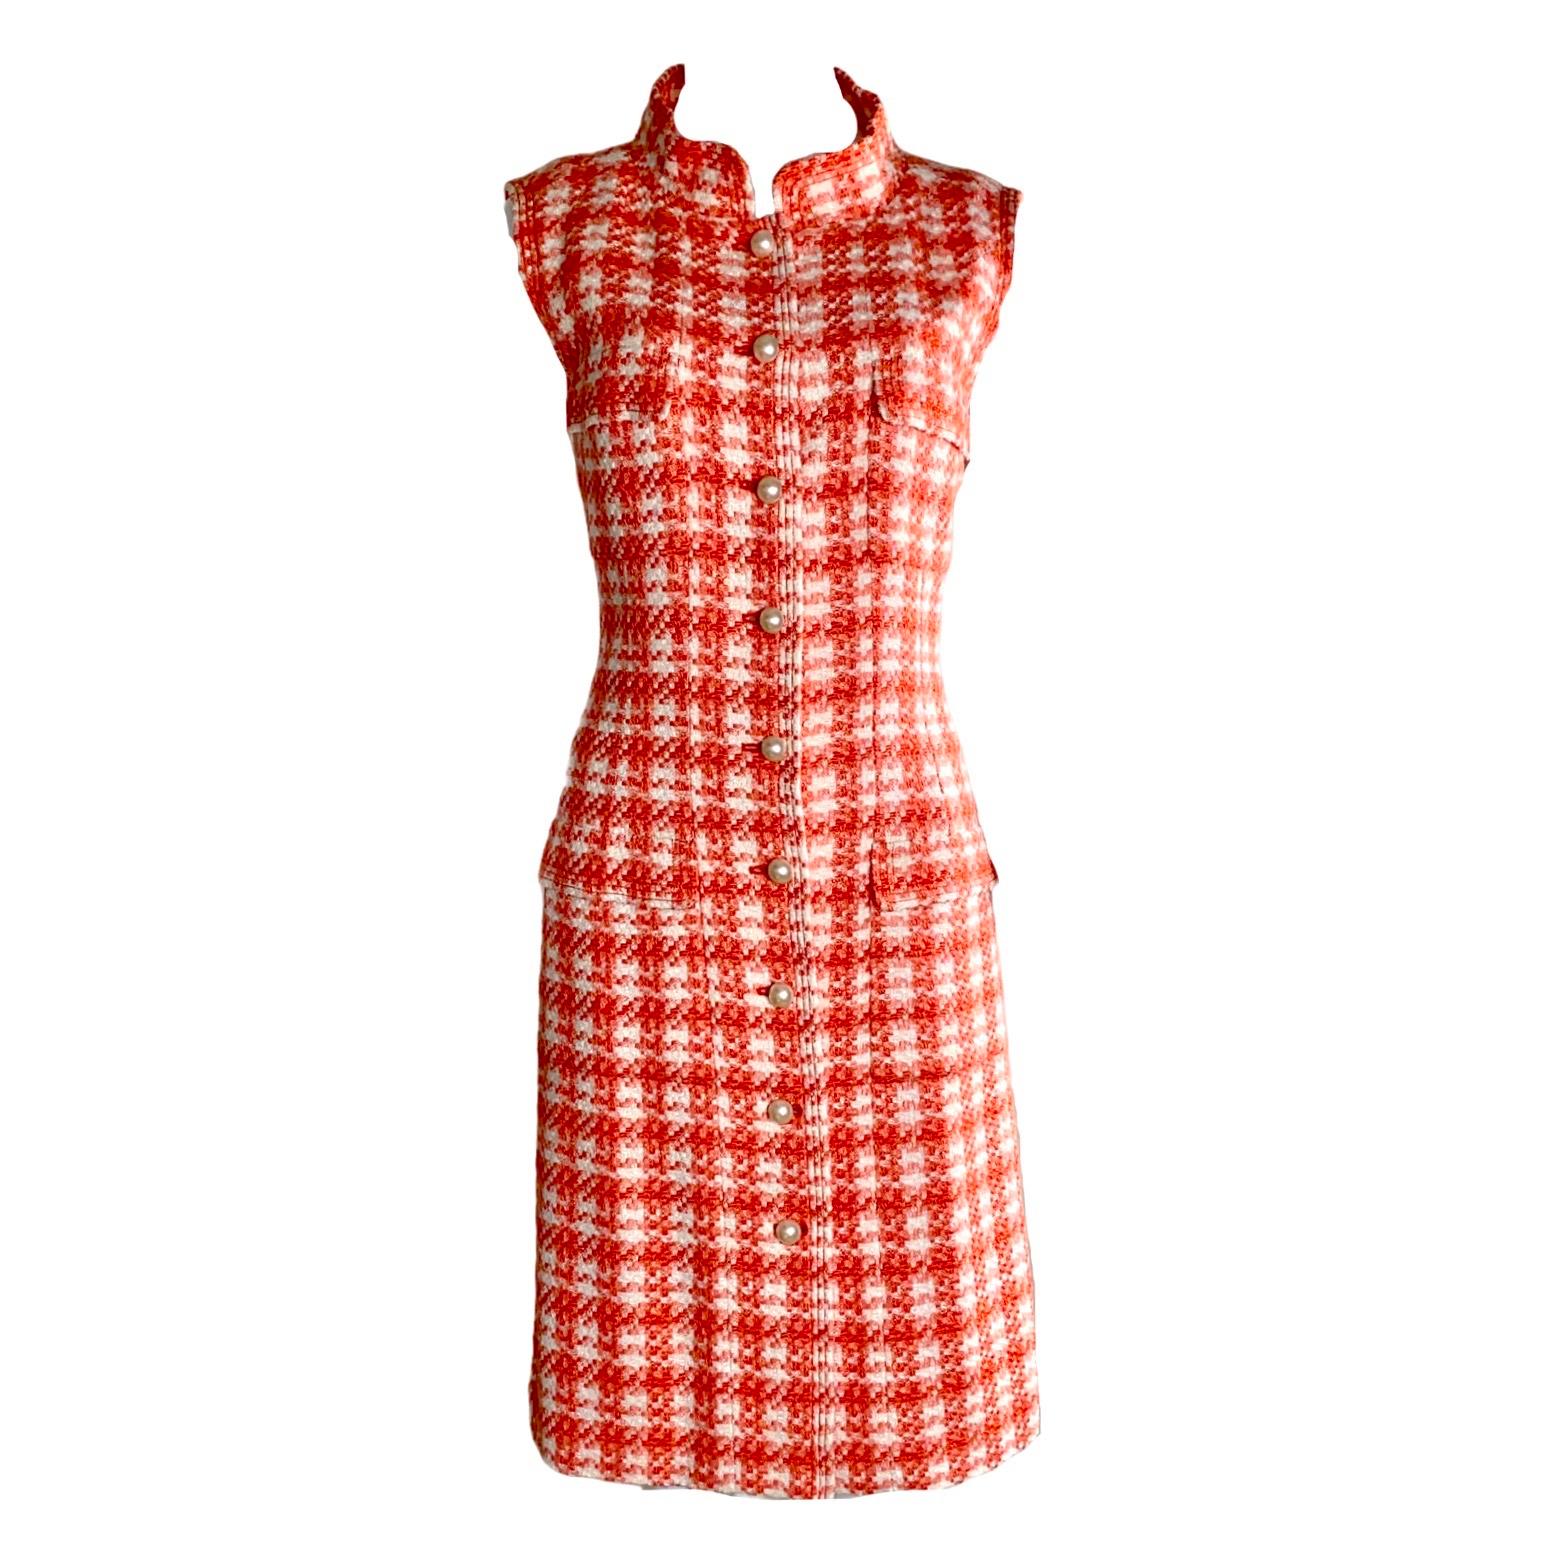 chanel houndstooth dress